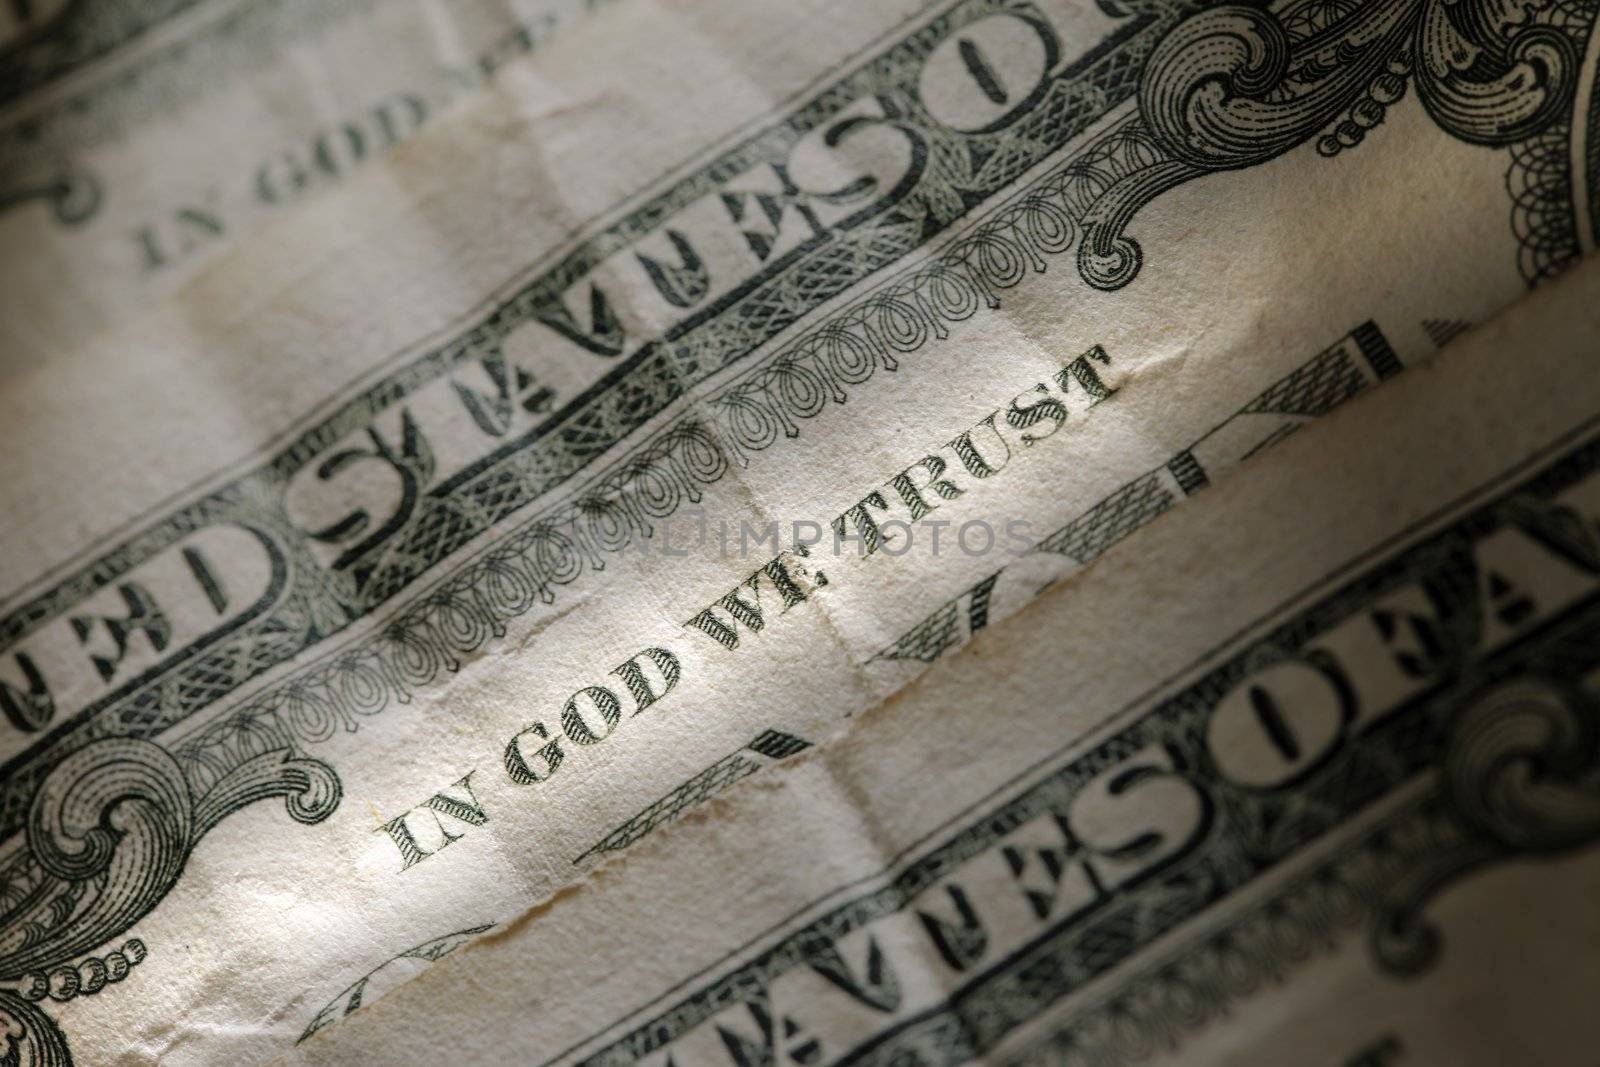 In God We Trust by Stocksnapper